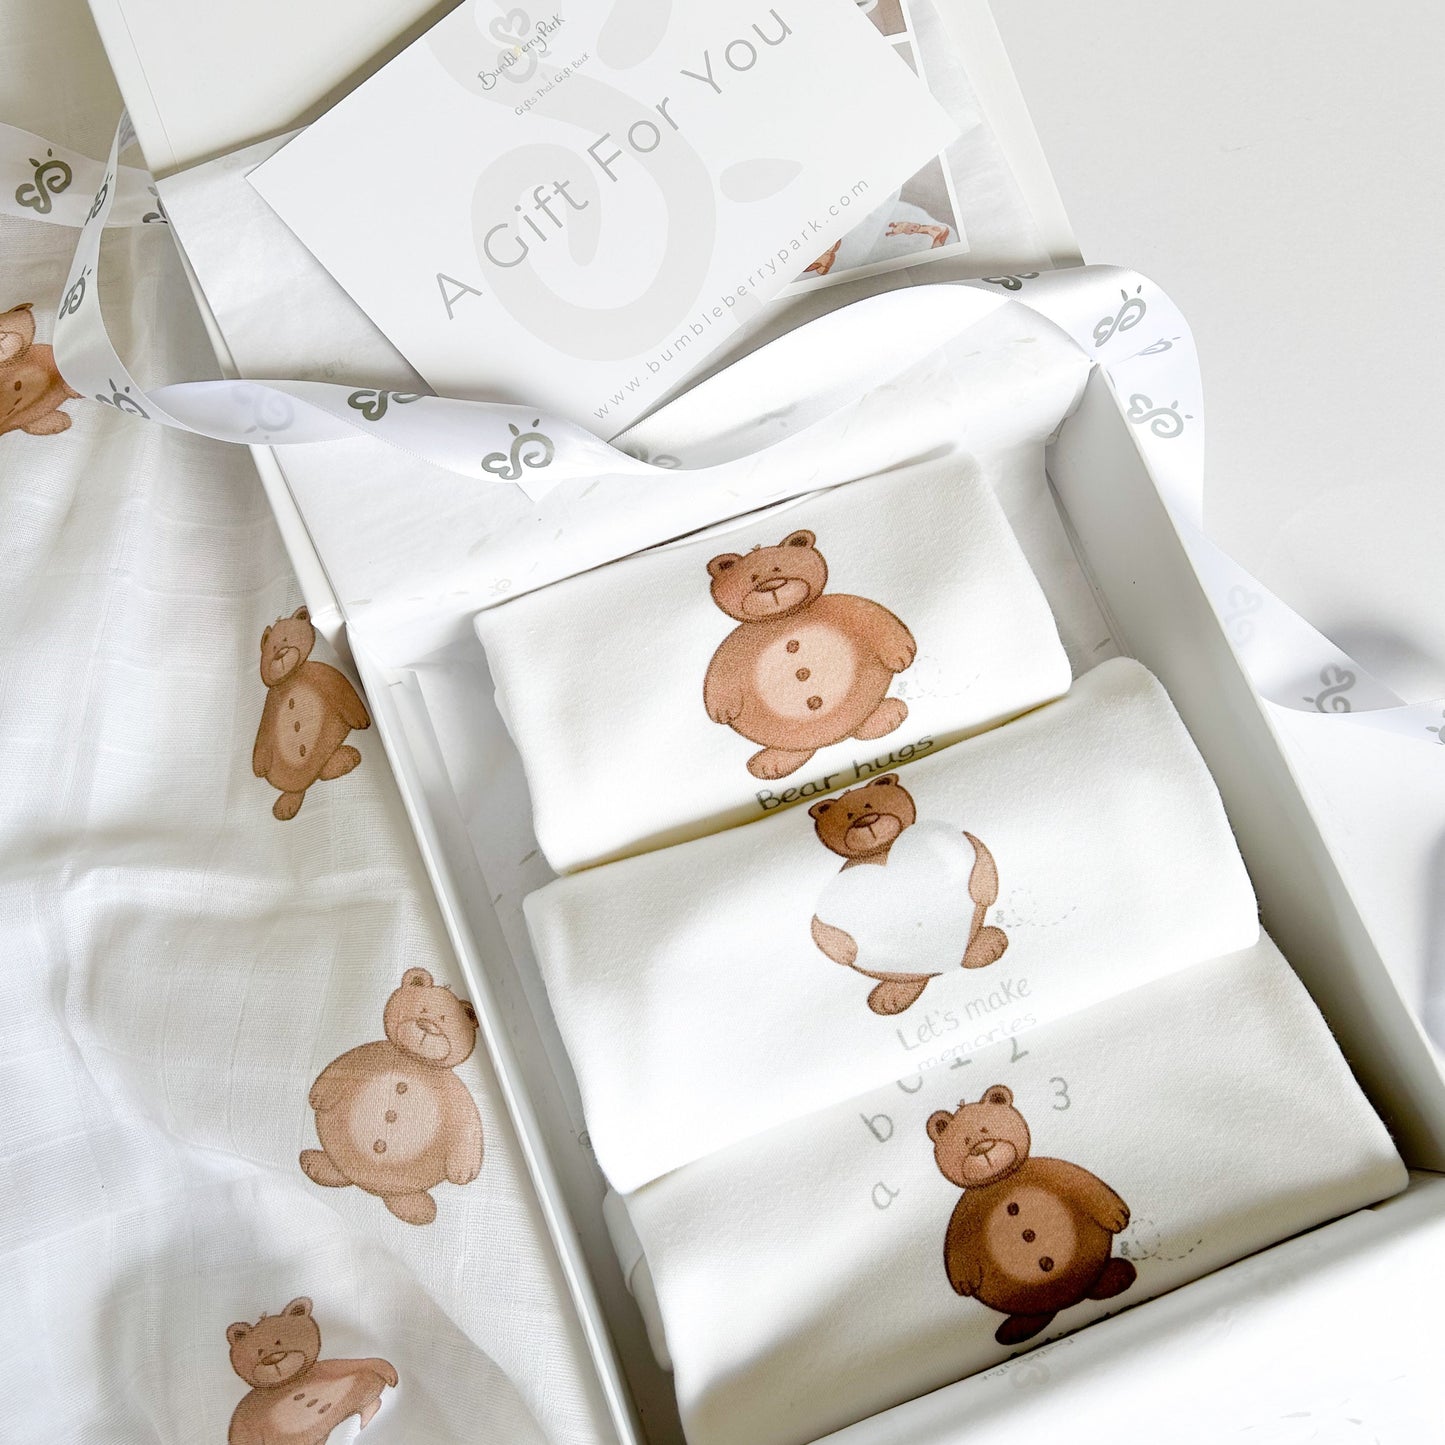 set of 3 mixed size baby bodysuits with cute teddy bear design and inspiring quotes for new parents and babies inside a luxury white gift box with satin ribbon